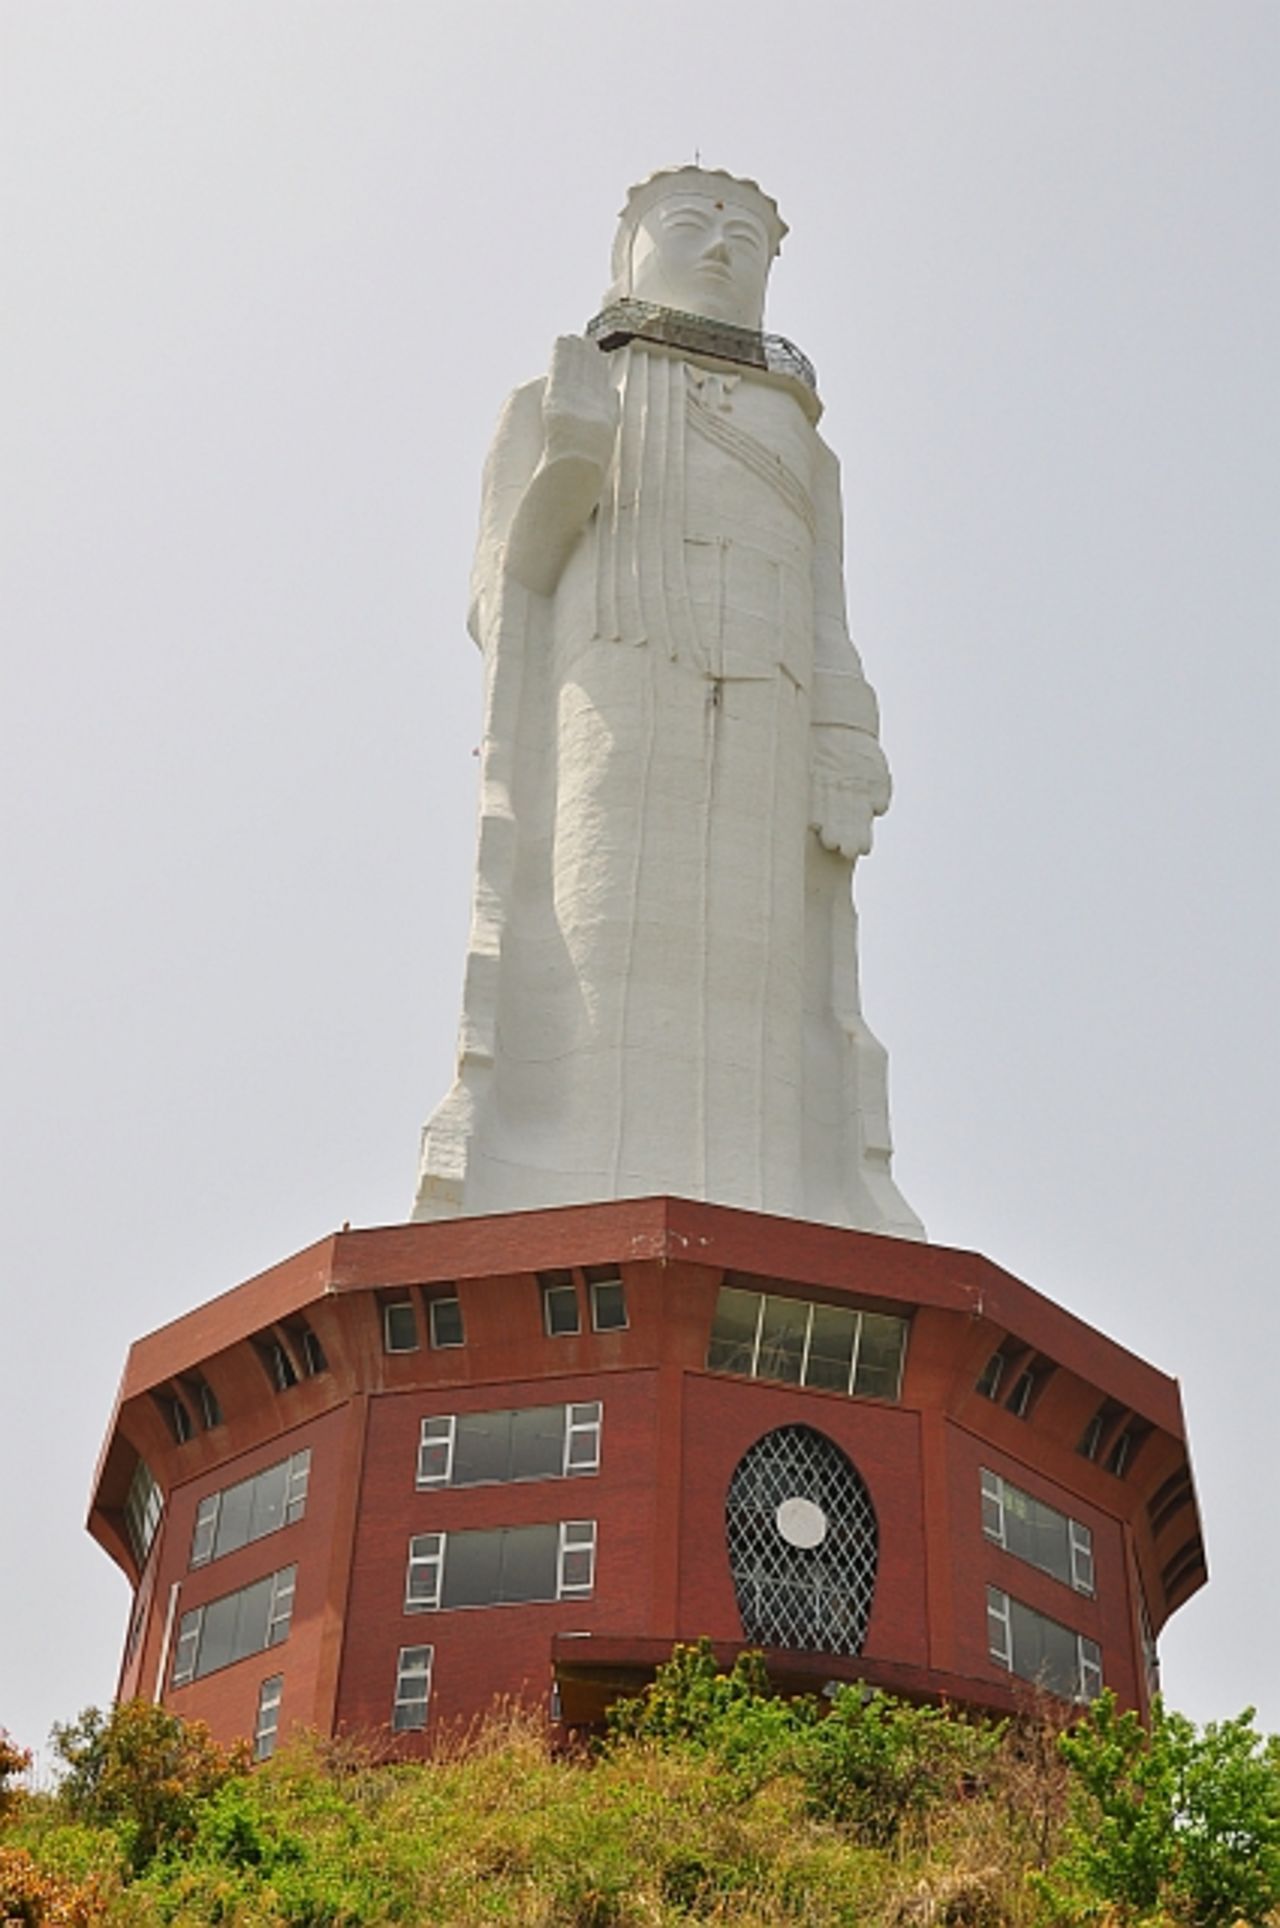 At a total height of 100 meters, the <a href="http://abandonedkansai.com/2012/09/24/world-peace-giant-kannon/" target="_blank" target="_blank">World Peace Giant Kannon</a>, or Awaji Kannon, is one of the tallest statues in the world. Located on Awaji Island, in Japan's Hyogo Prefecture, it closed in 2006 following the death of its owner. Though put to auction several times since, Seidel says there were no takers. 